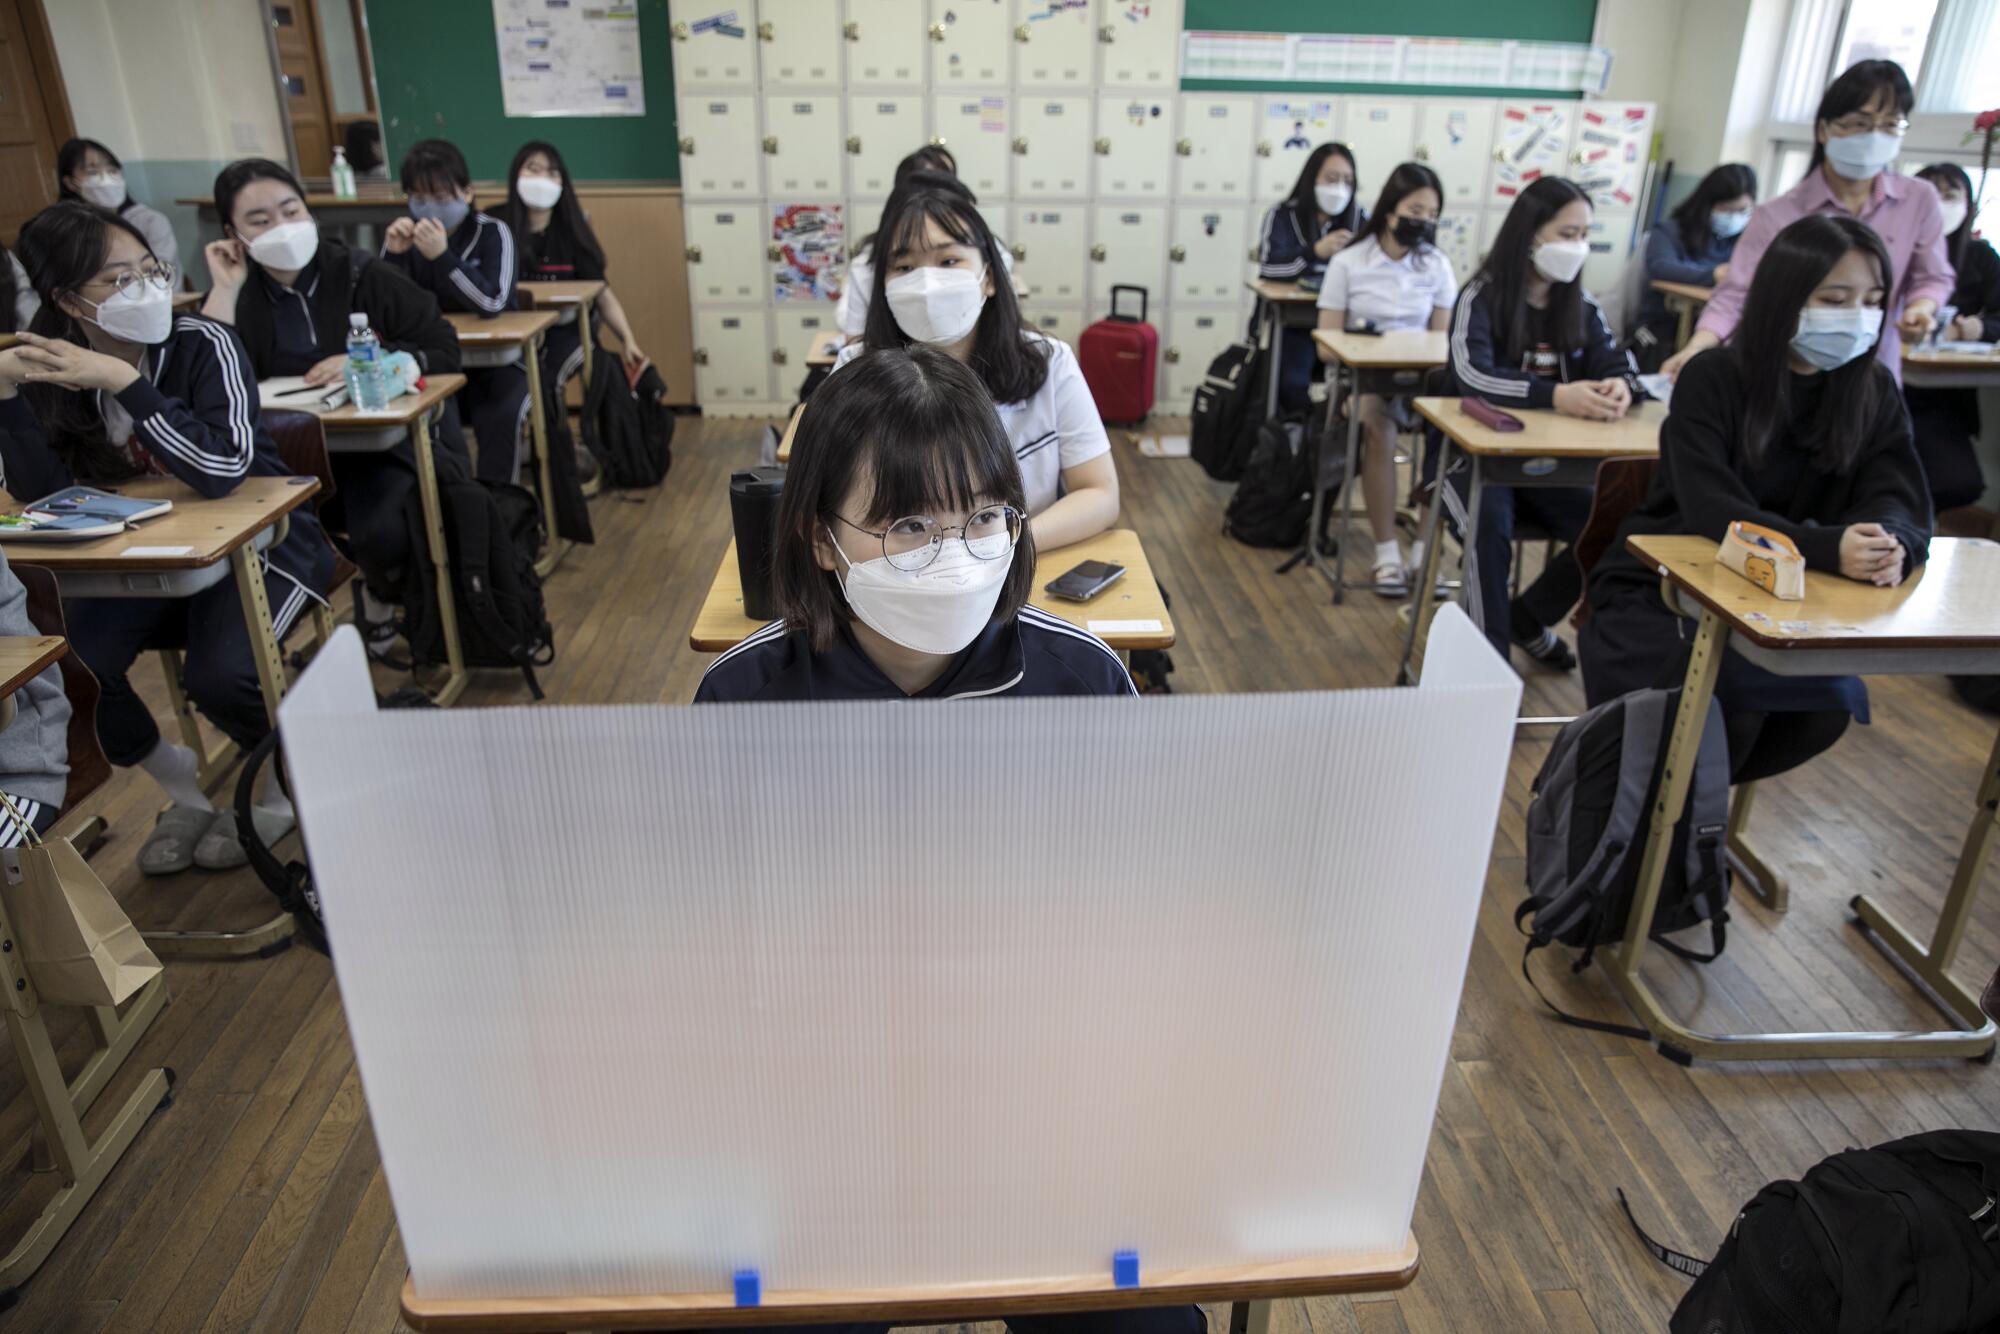 Students at Gyungbuk Girls' High School await the first bell on their first day back after school closures in Daegu, South Korea, due to the COVID-19 pandemic. High school seniors were the first to resume classes in the country.